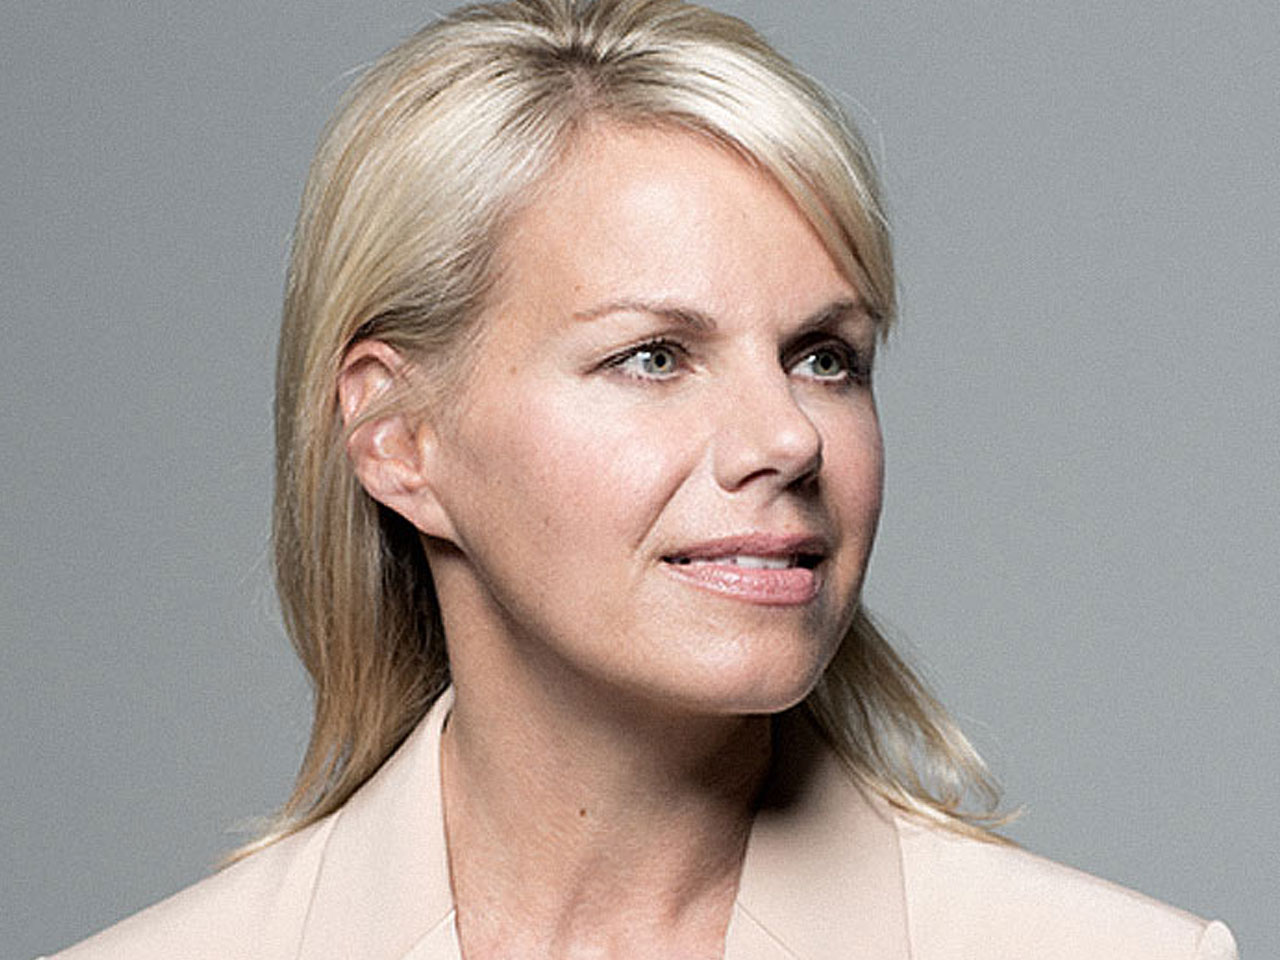 GEABP client Gretchen Carlson returns to television, joining with A+E Networks to  host and co-produce three documentary specials for Lifetime